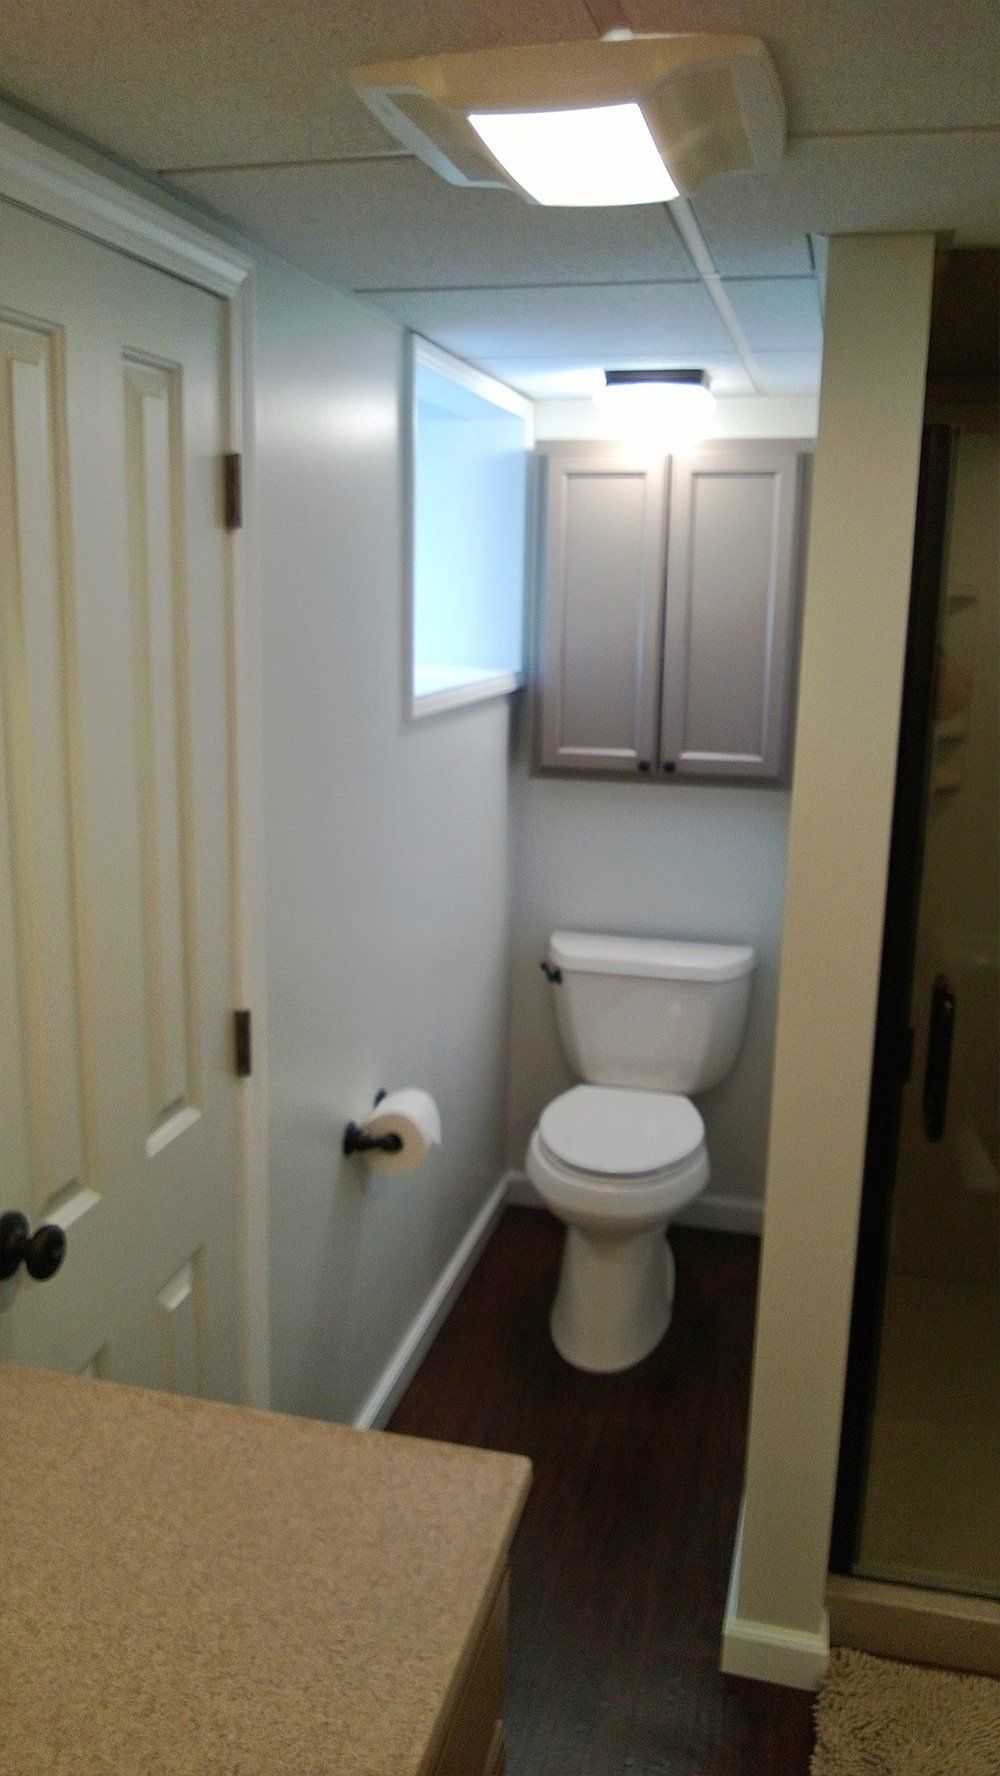 Interior bathroom - Remodeling Services in Slippery Rock, PA